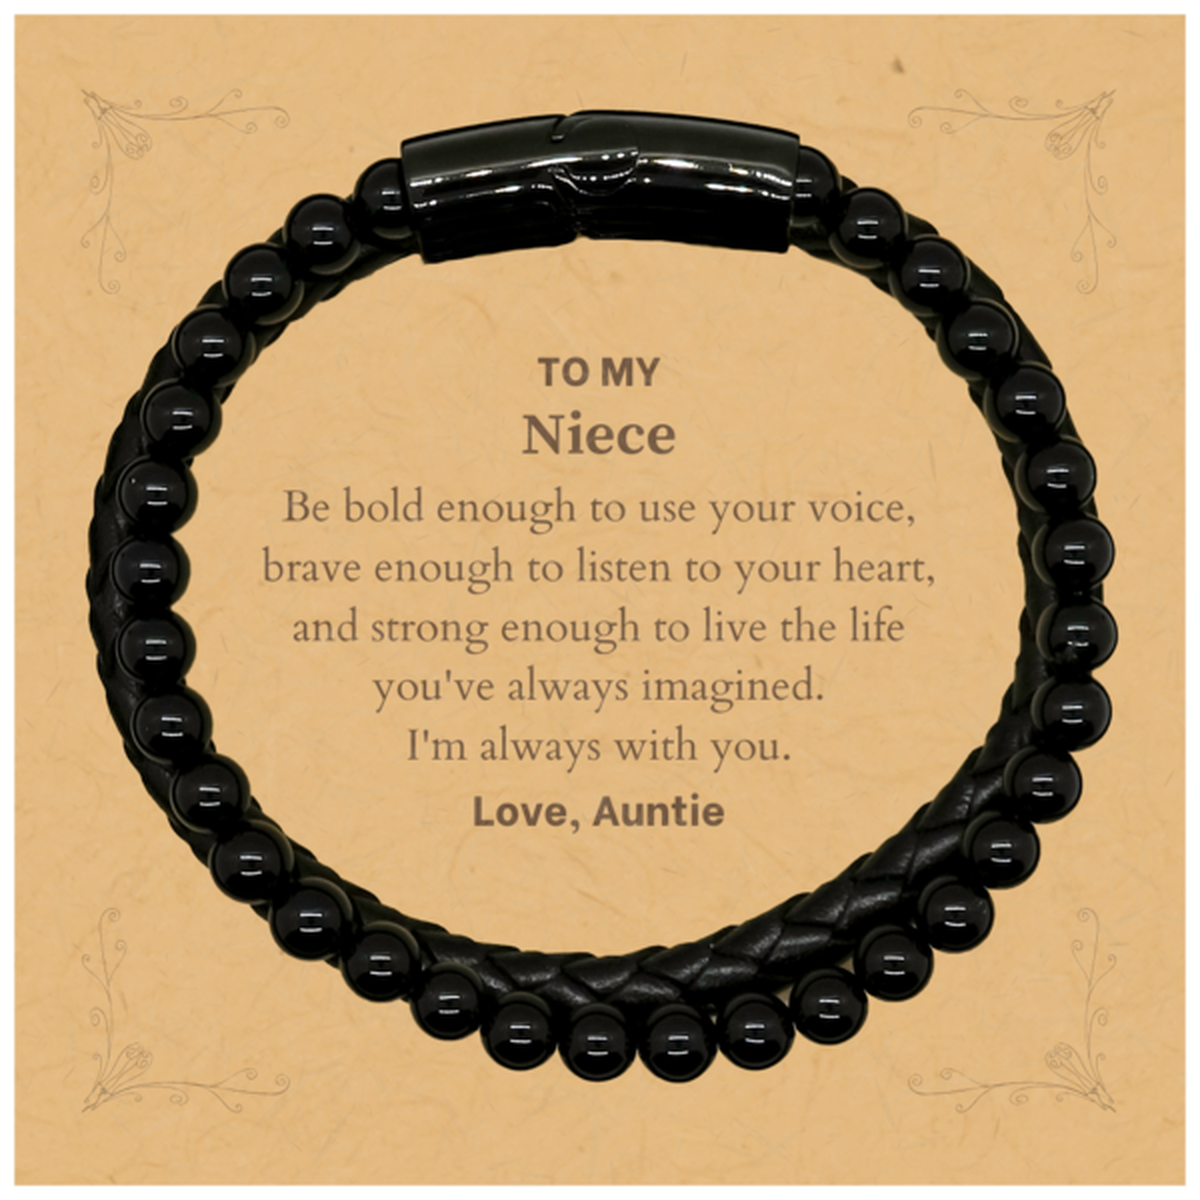 Keepsake Niece Stone Leather Bracelets Gift Idea Graduation Christmas Birthday Niece from Auntie, Niece Be bold enough to use your voice, brave enough to listen to your heart. Love, Auntie